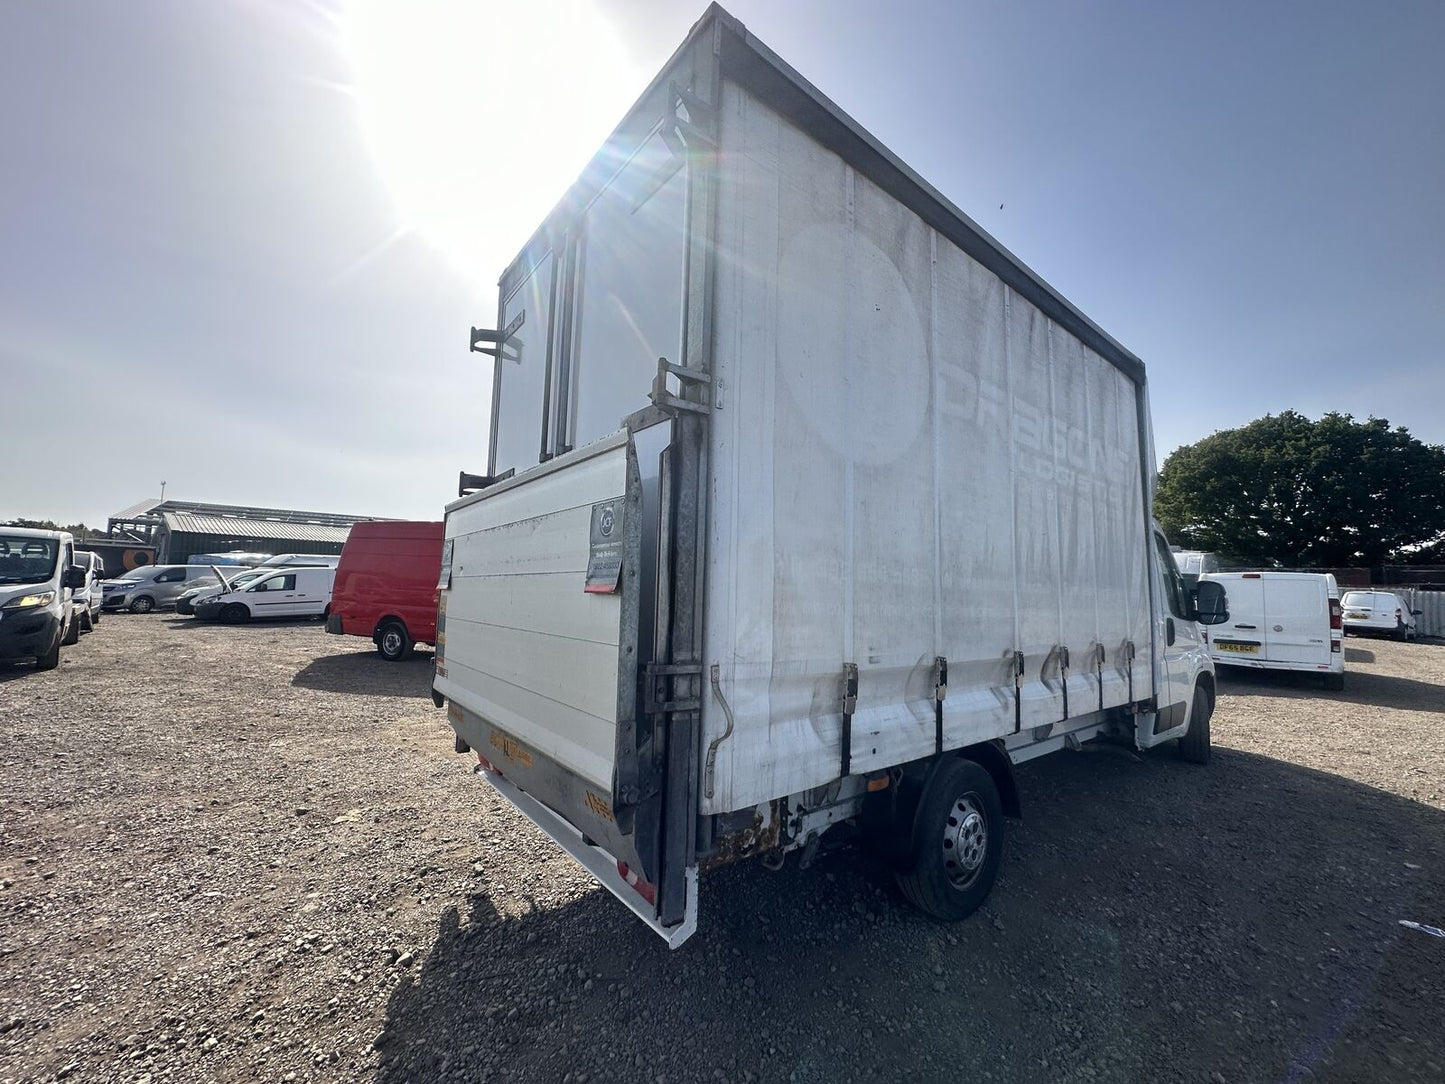 Bid on ONE FORMER KEEPER: 2018 PEUGEOT BOXER LUTON- Buy &amp; Sell on Auction with EAMA Group